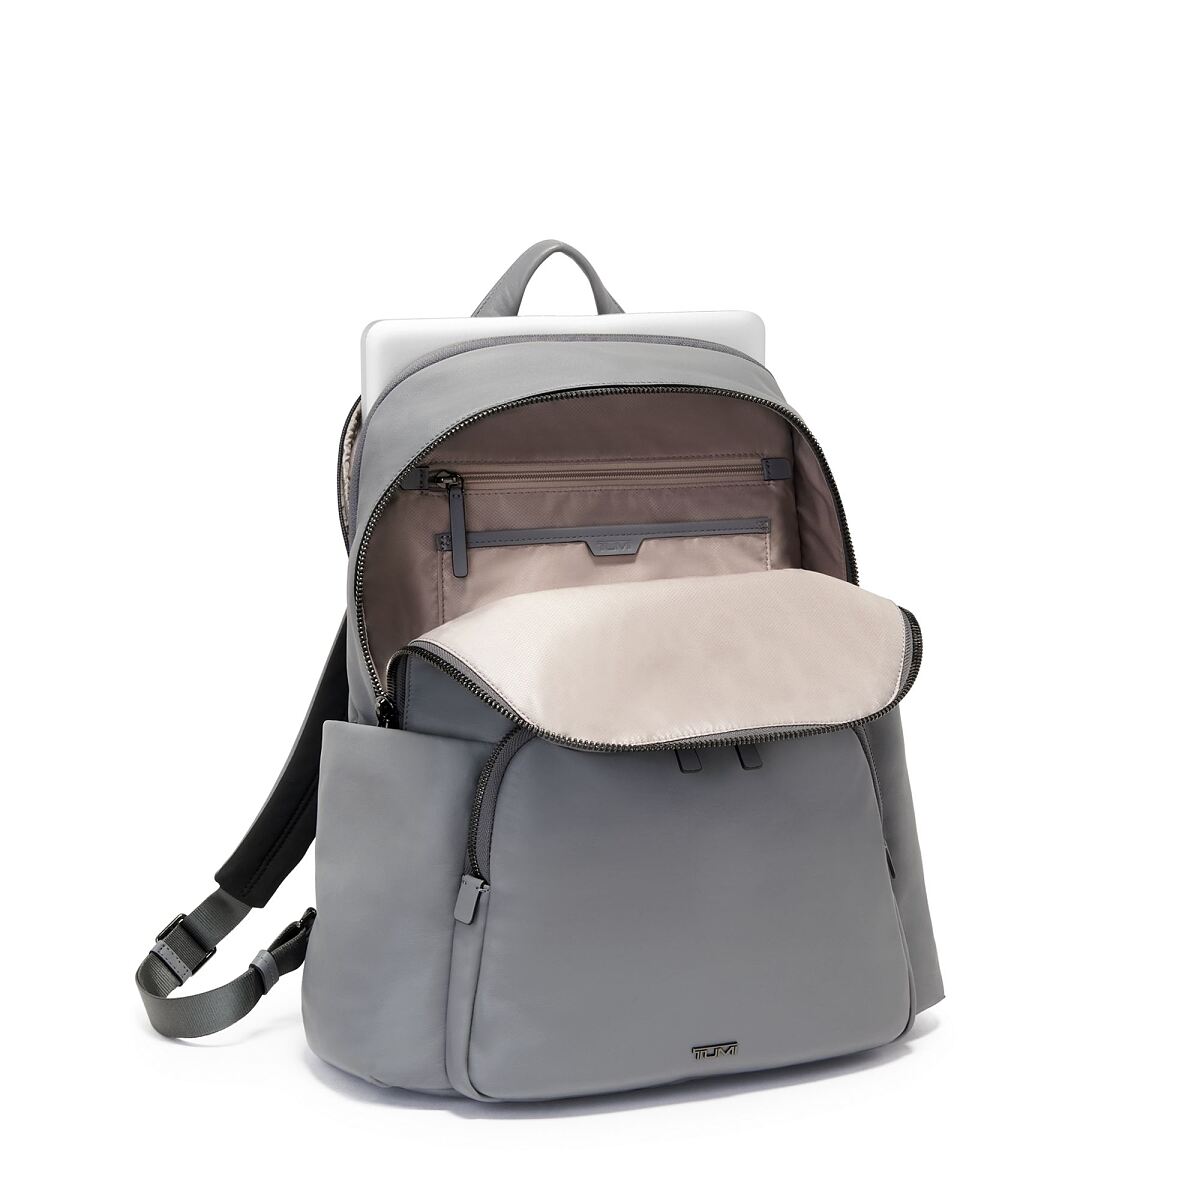 TUMI_Voyageur_Leather_Ruby Backpack_Color_Pearl_Grey_€575